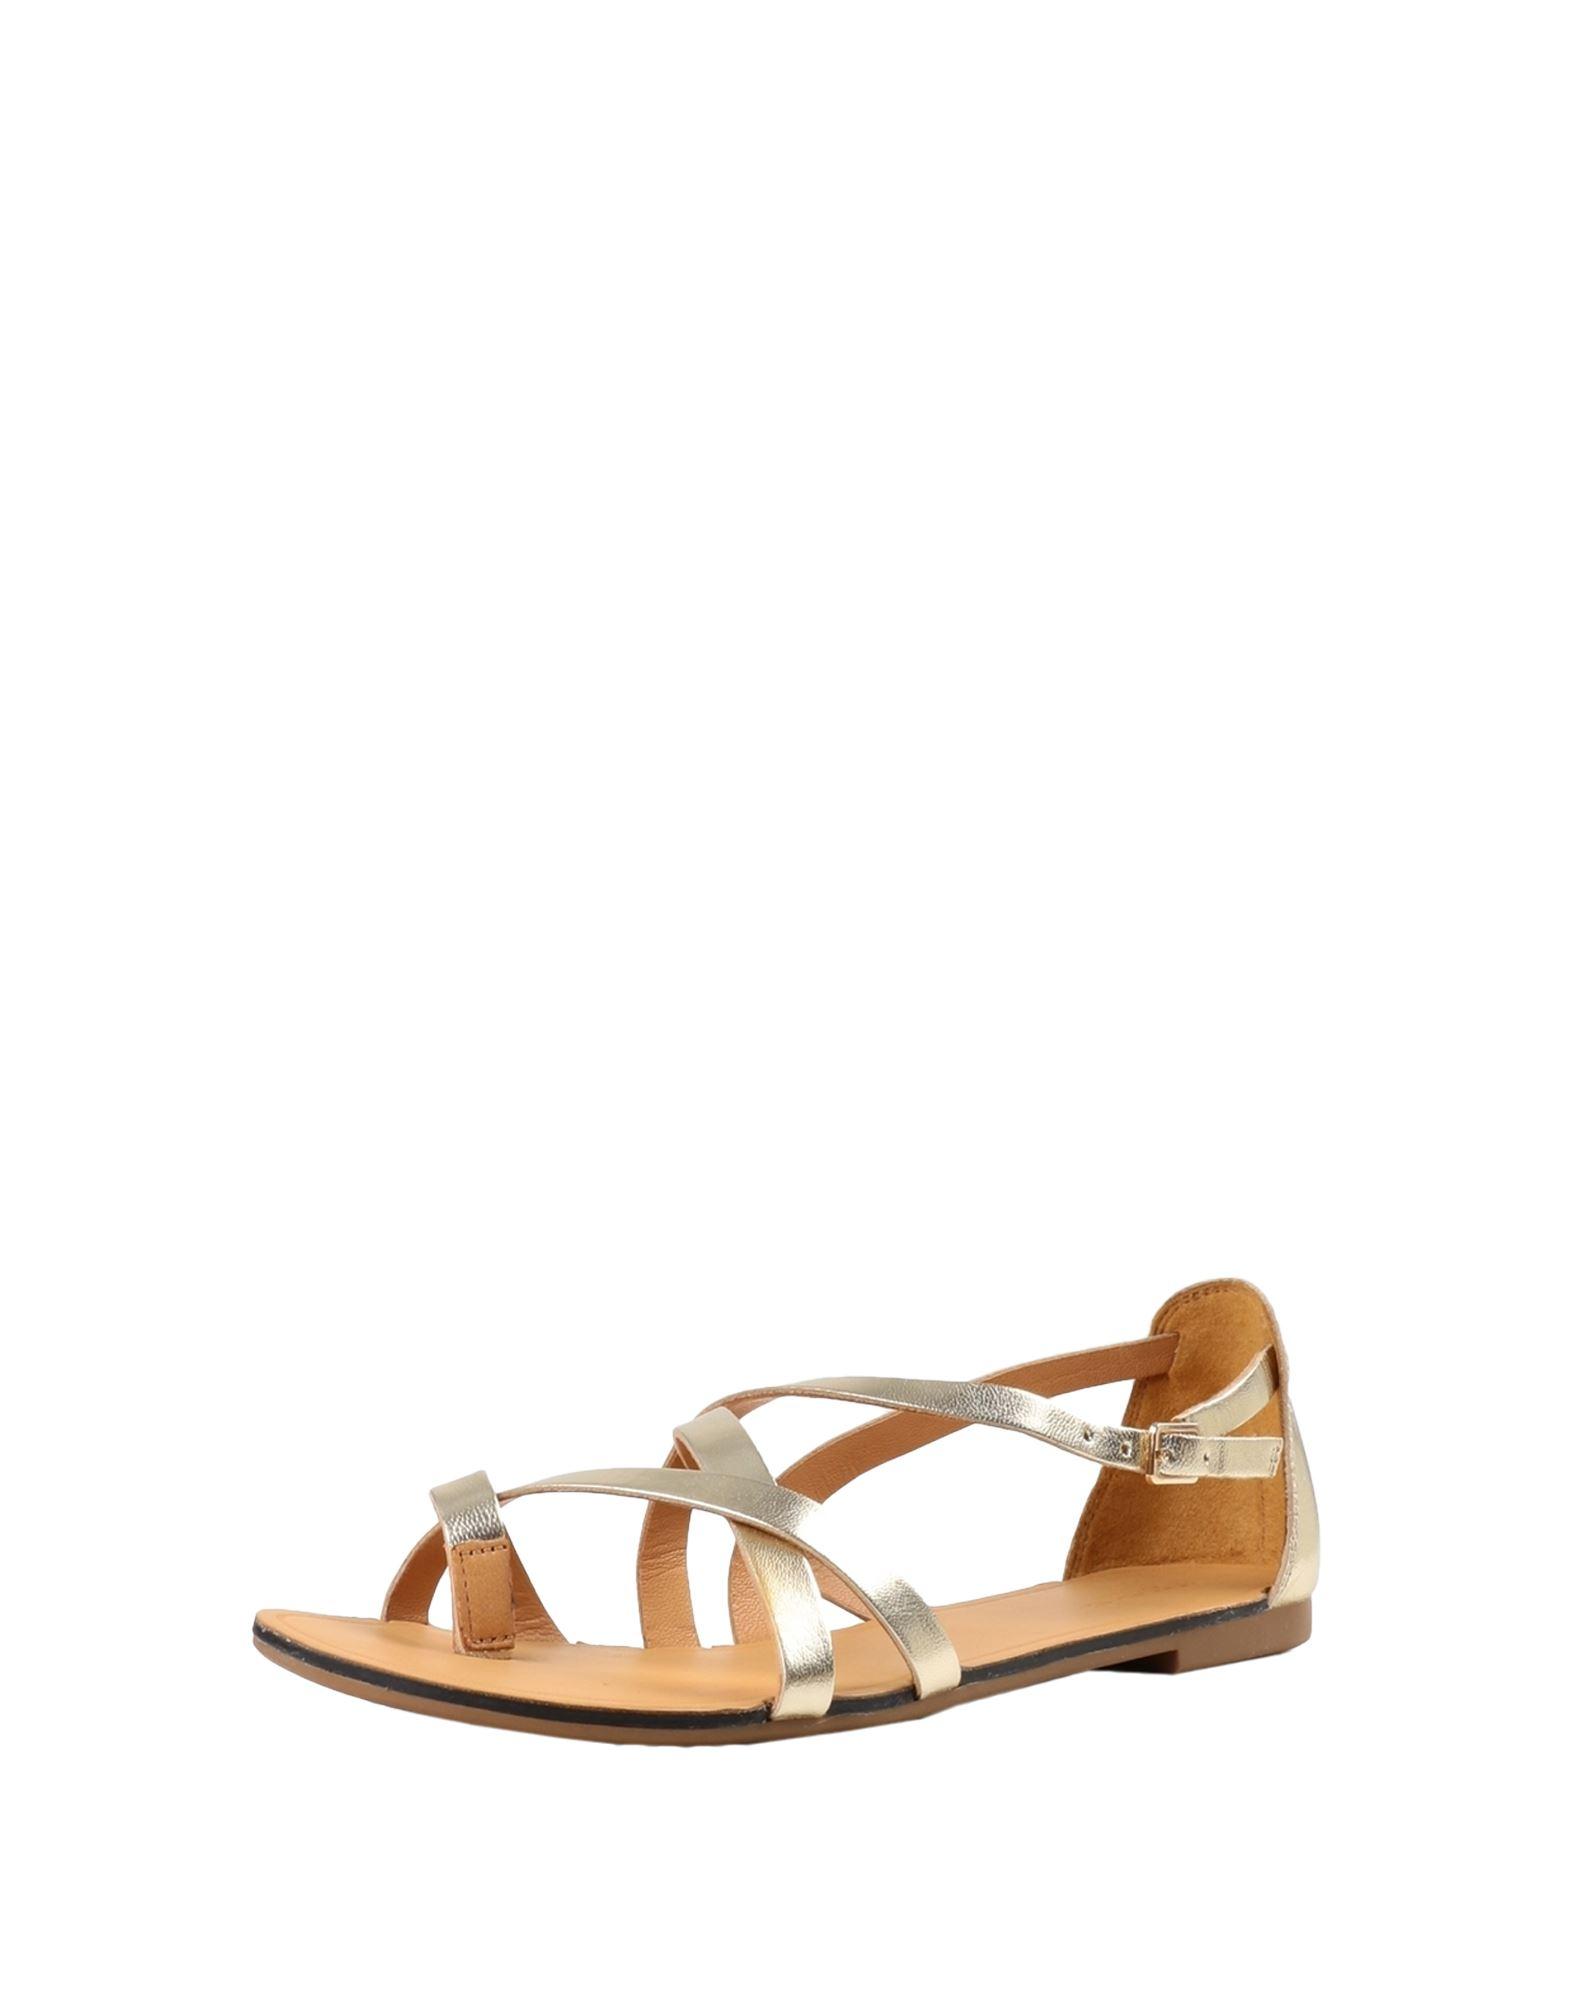 Vagabond Shoemakers Leather Toe Post Sandals in Gold (Metallic) | Lyst